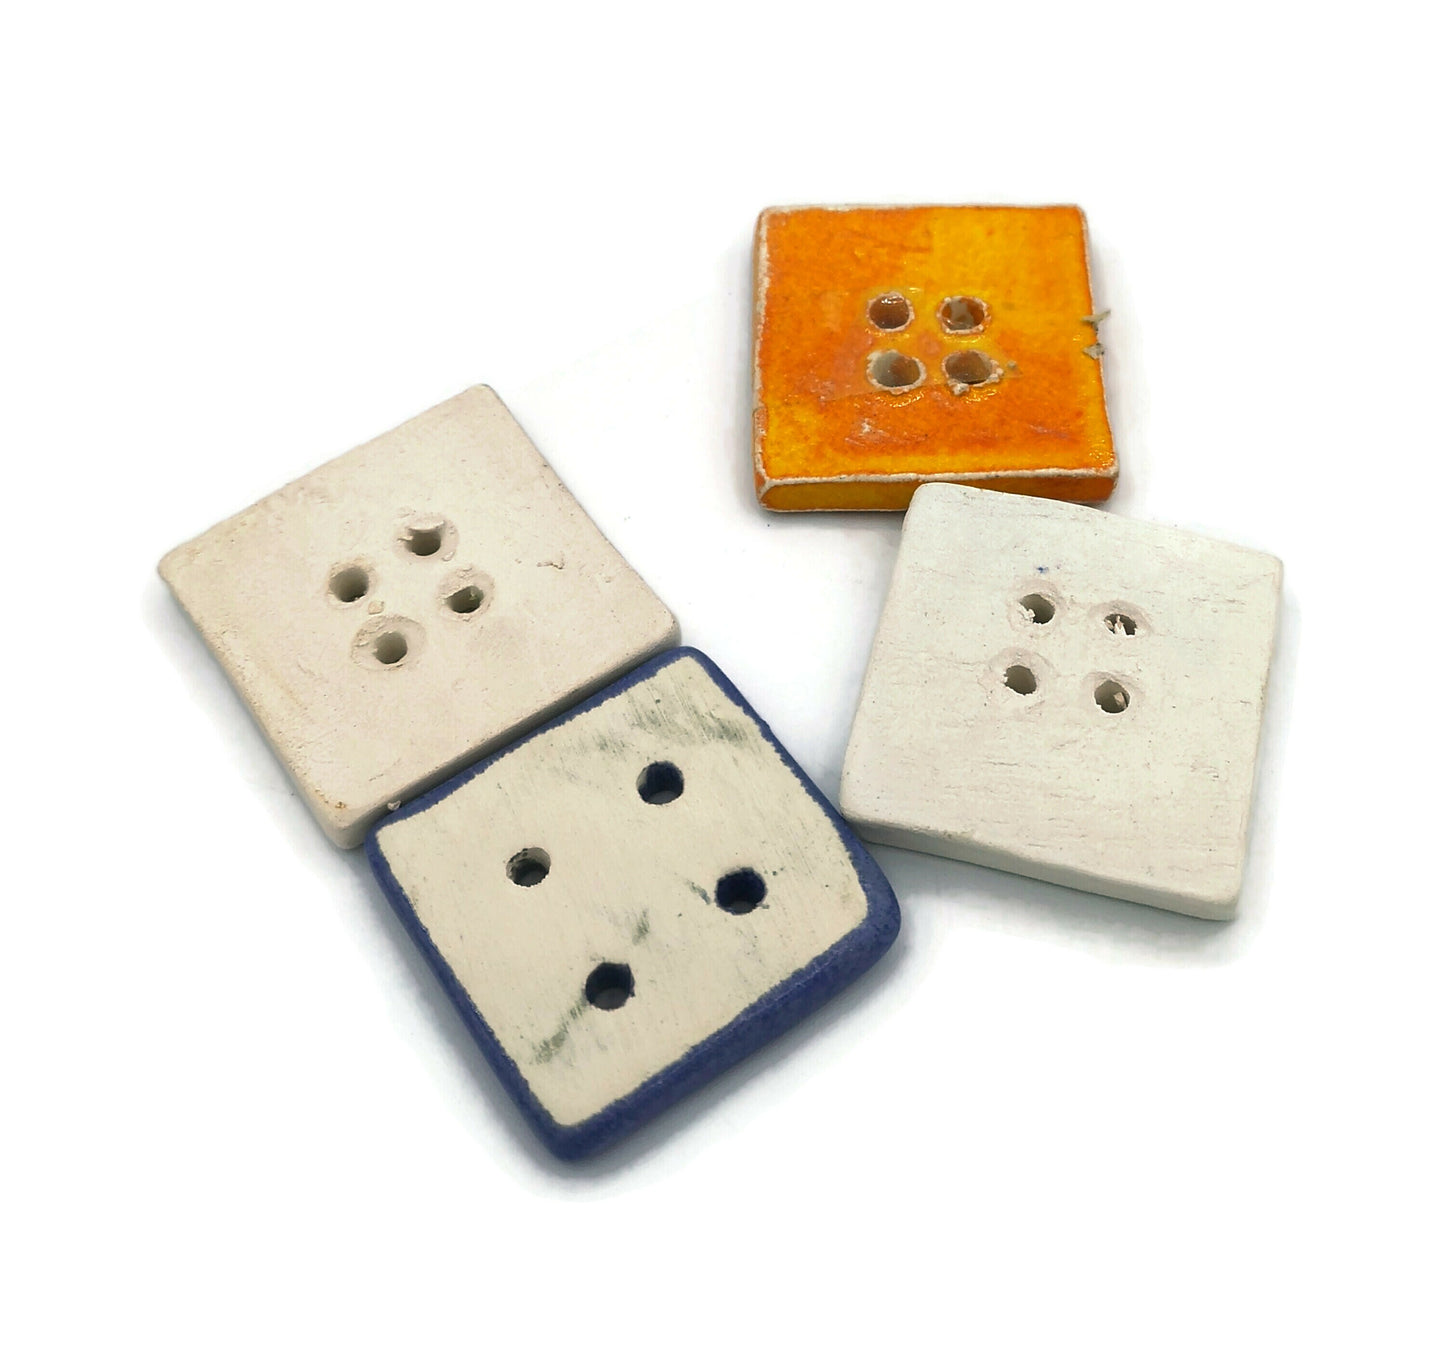 Large Square Buttons, Handmade Ceramic Buttons Set Of 4 Novelty Sewing Buttons - Ceramica Ana Rafael